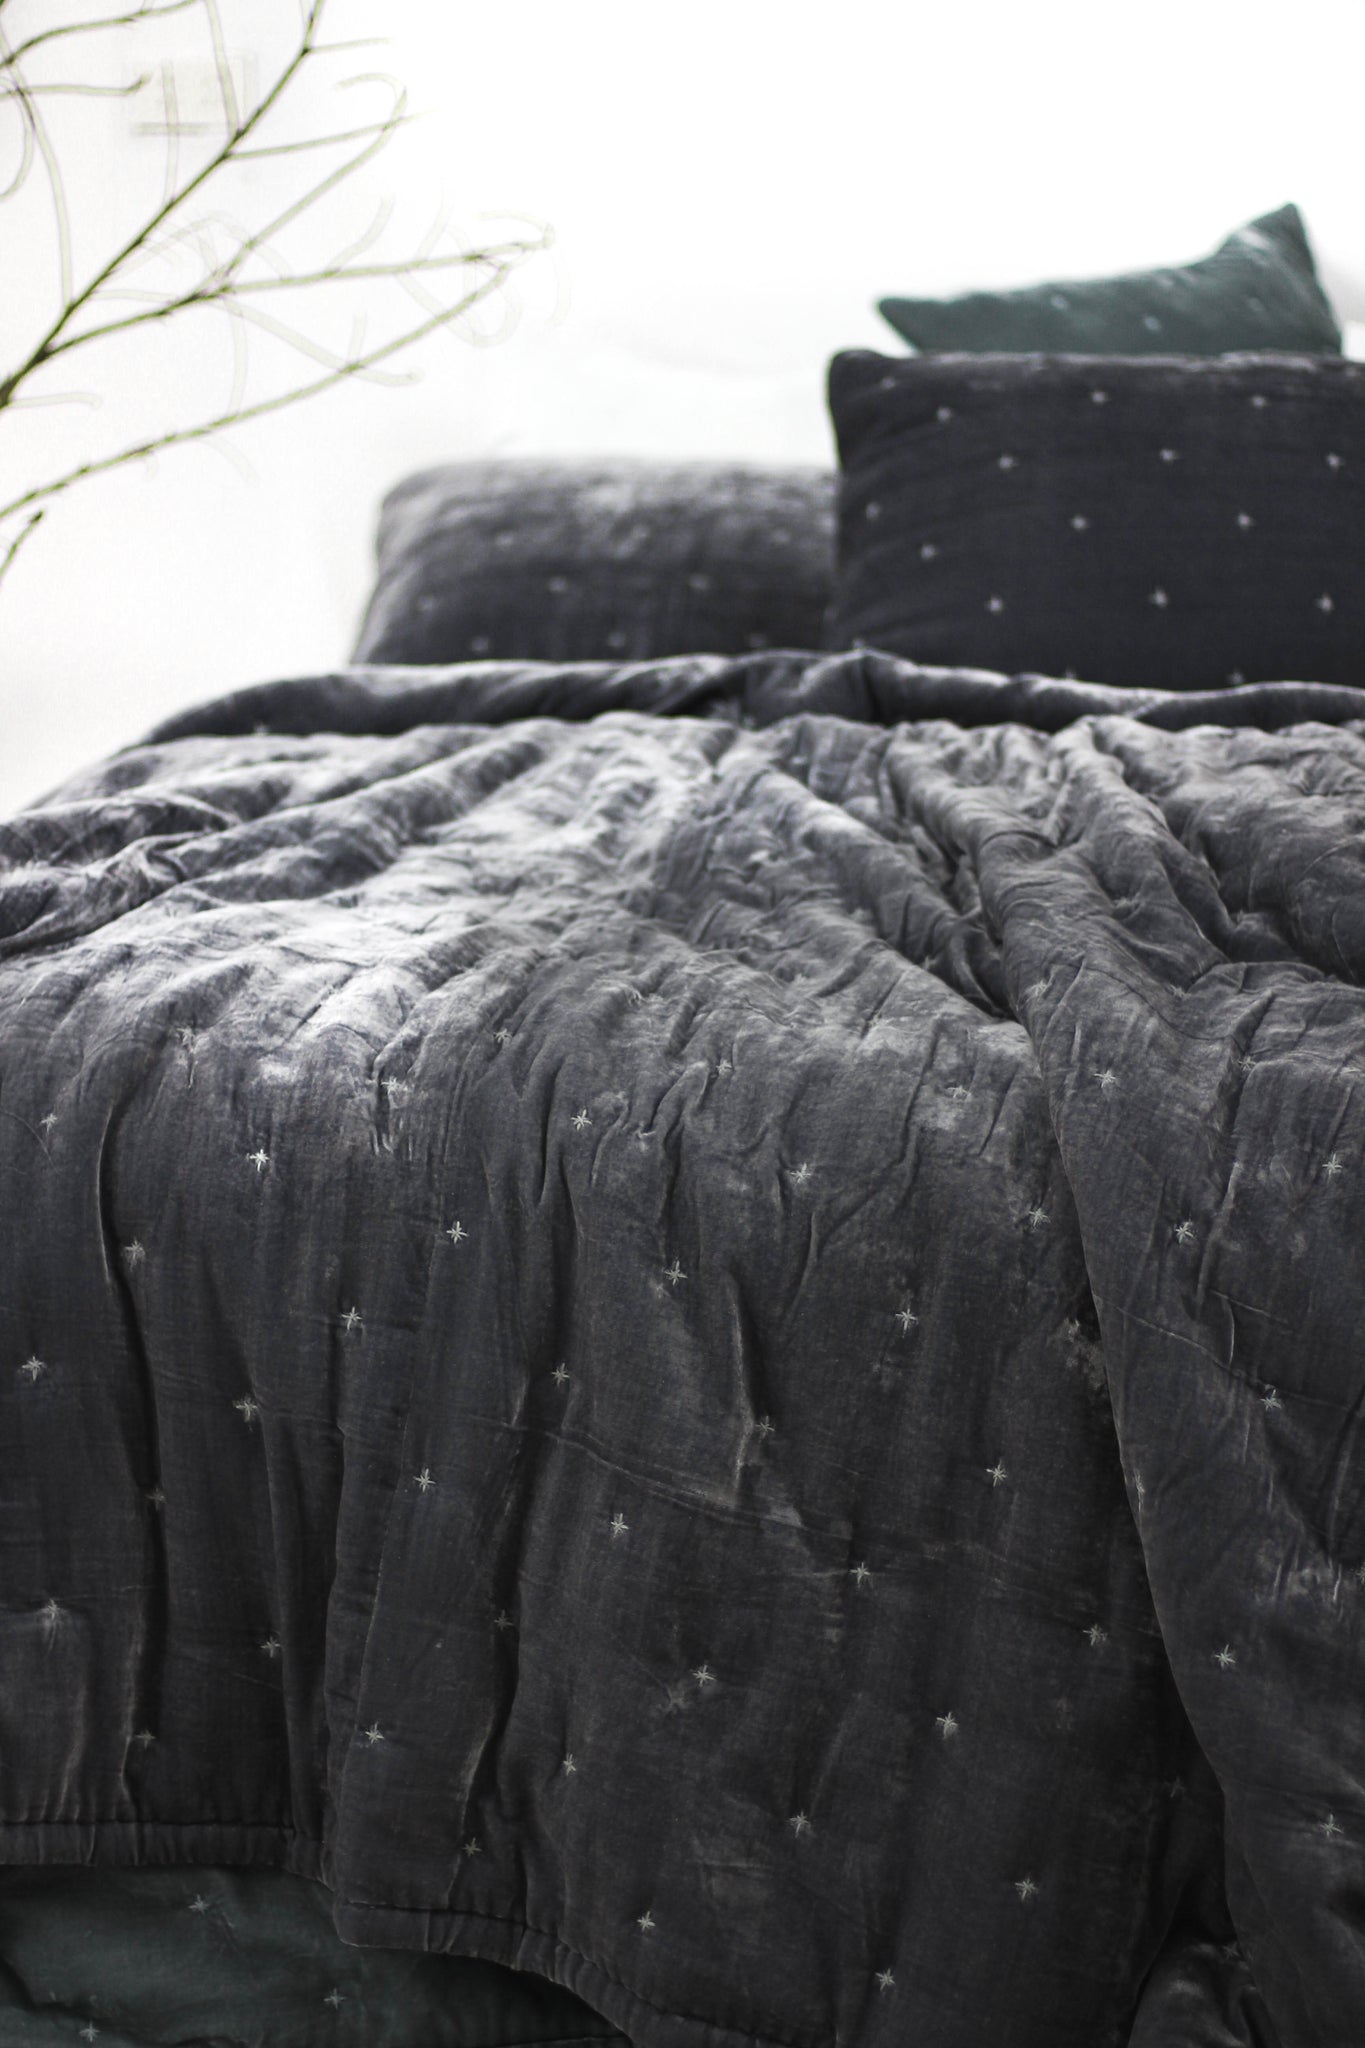 Silk Velvet Hand Quilted Duvet- Gray Throw Blanket with Starry Hand Stitching